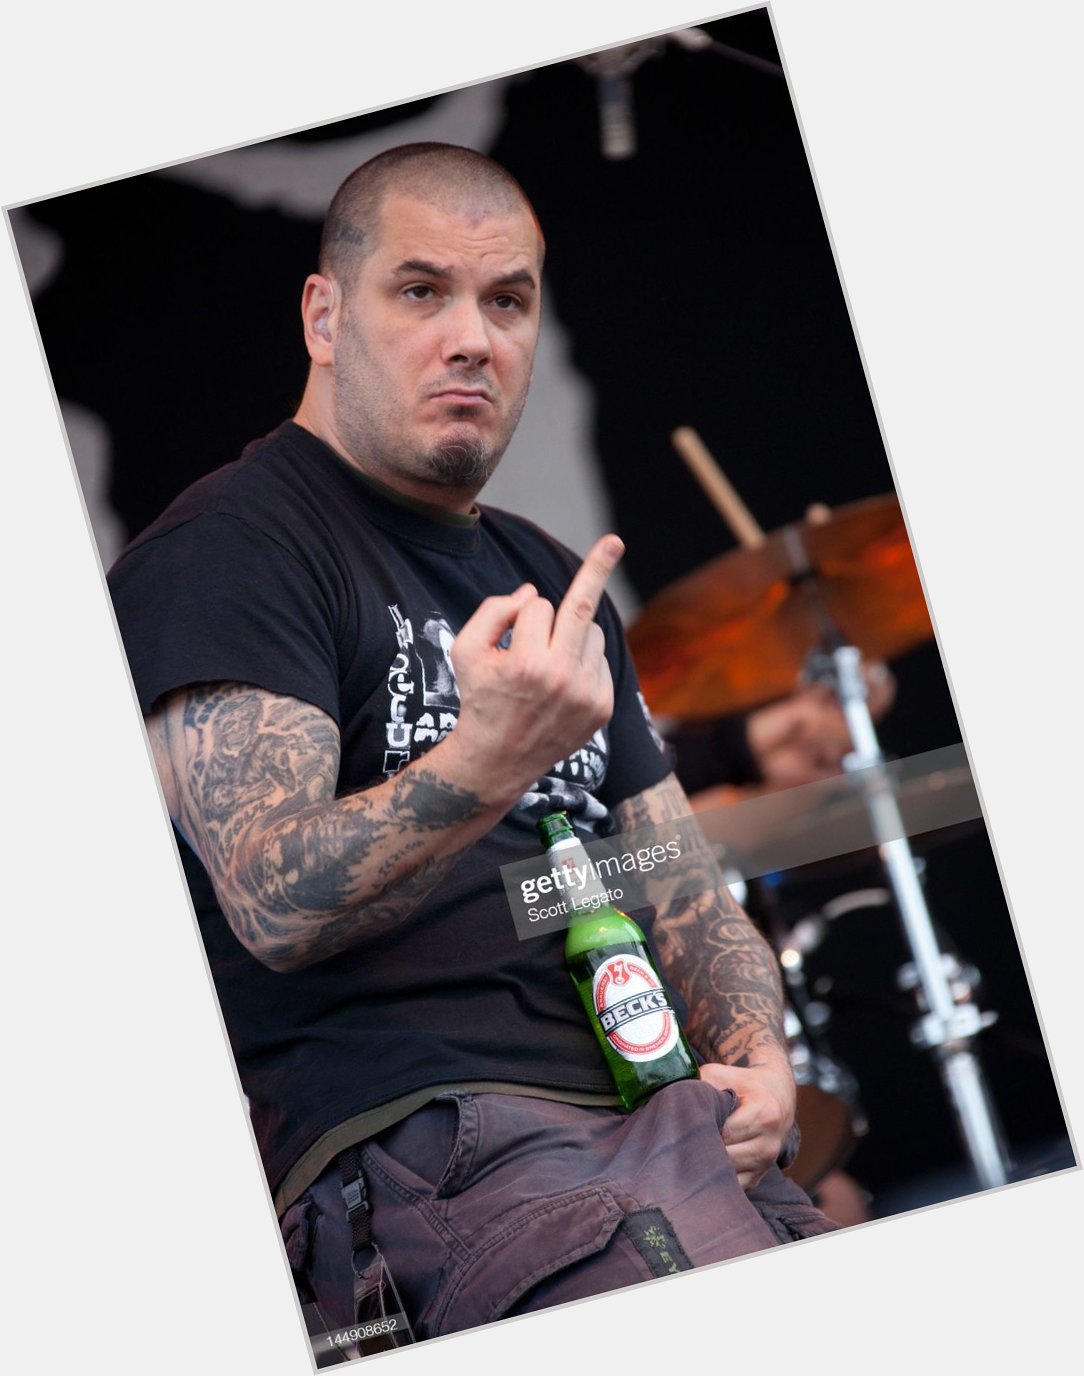 Apparently it s phil anselmo s birthday so happy birthday to the goat he s such a good singer 